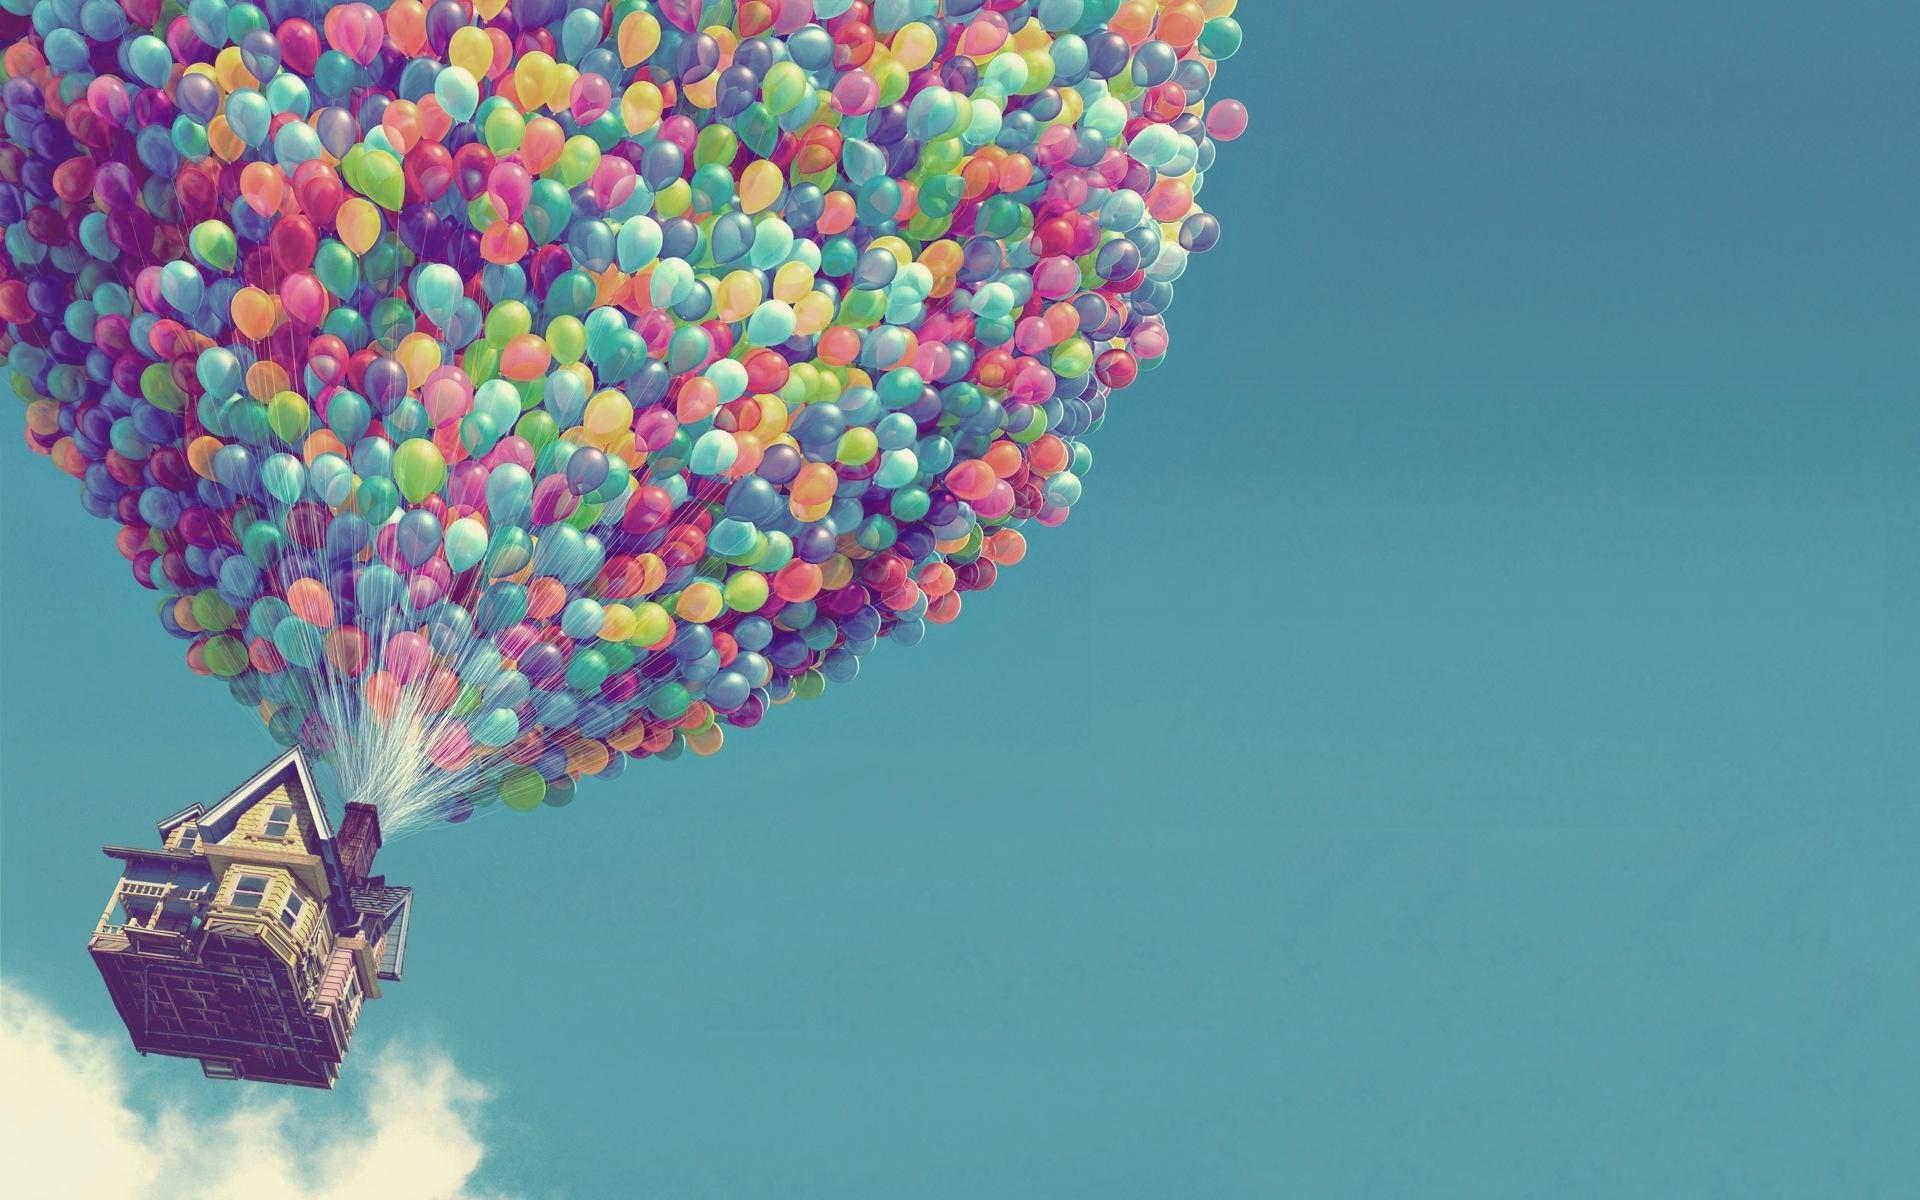 Daily Wallpaper: Up Movie. I Like To Waste My Time. Balloons